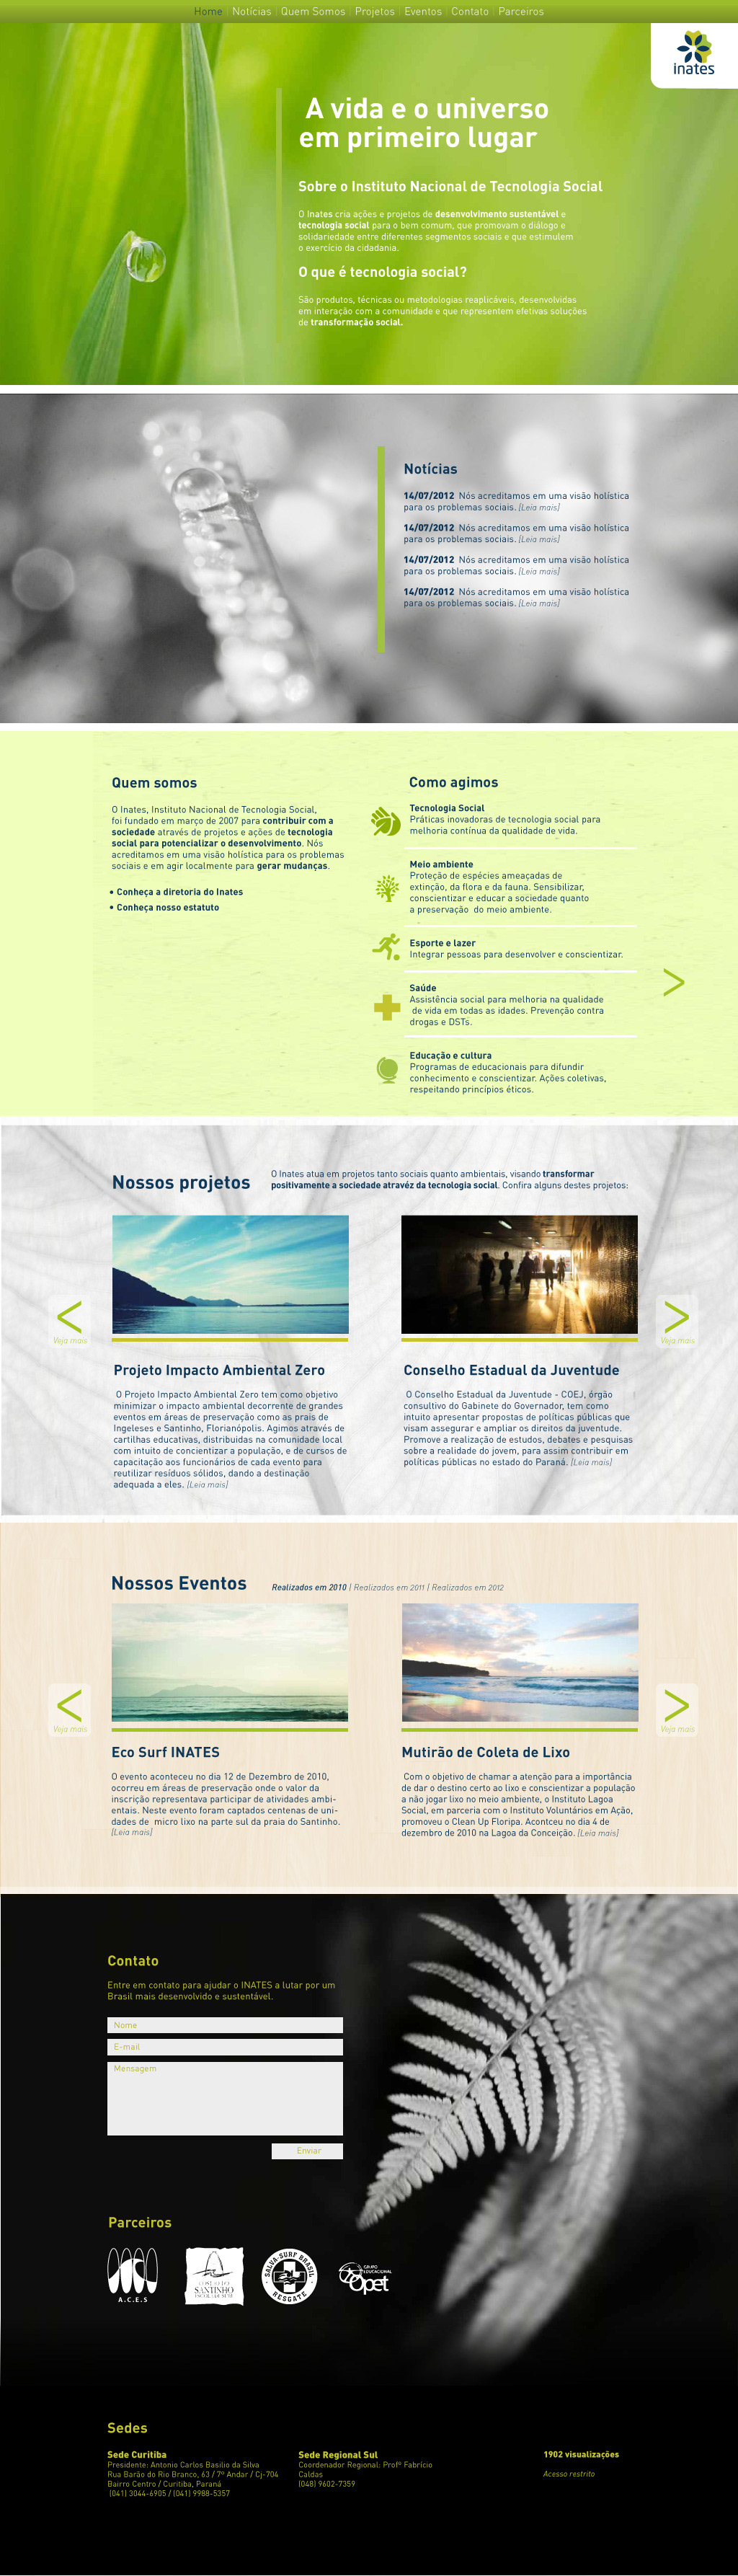 brand identidade visual ong one page site redesign